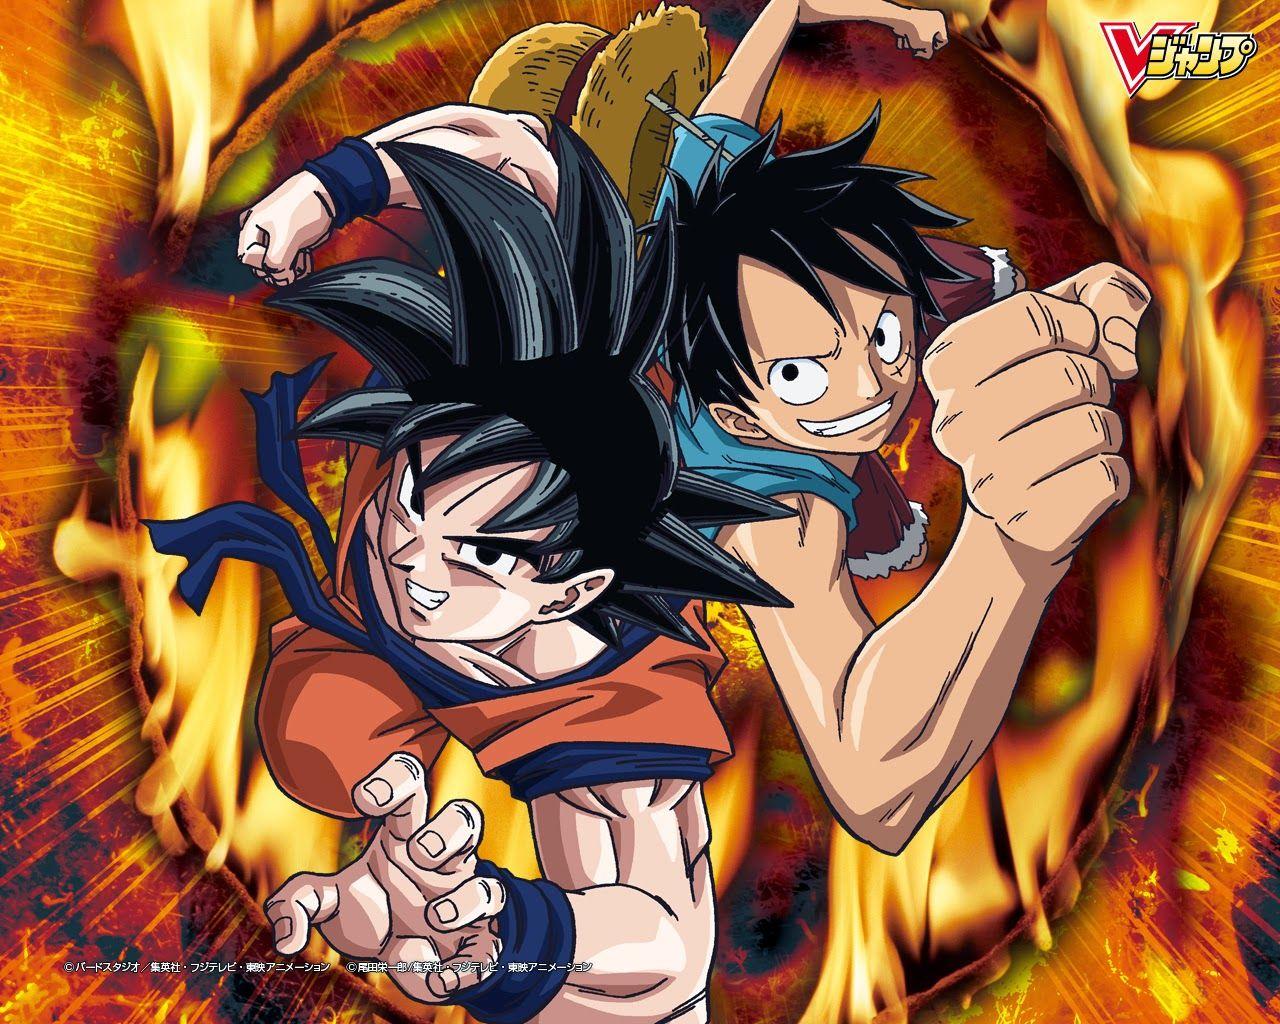 Goku and Luffy One Piece Wallpaper Free For PC wallpaper HD Wallpaper